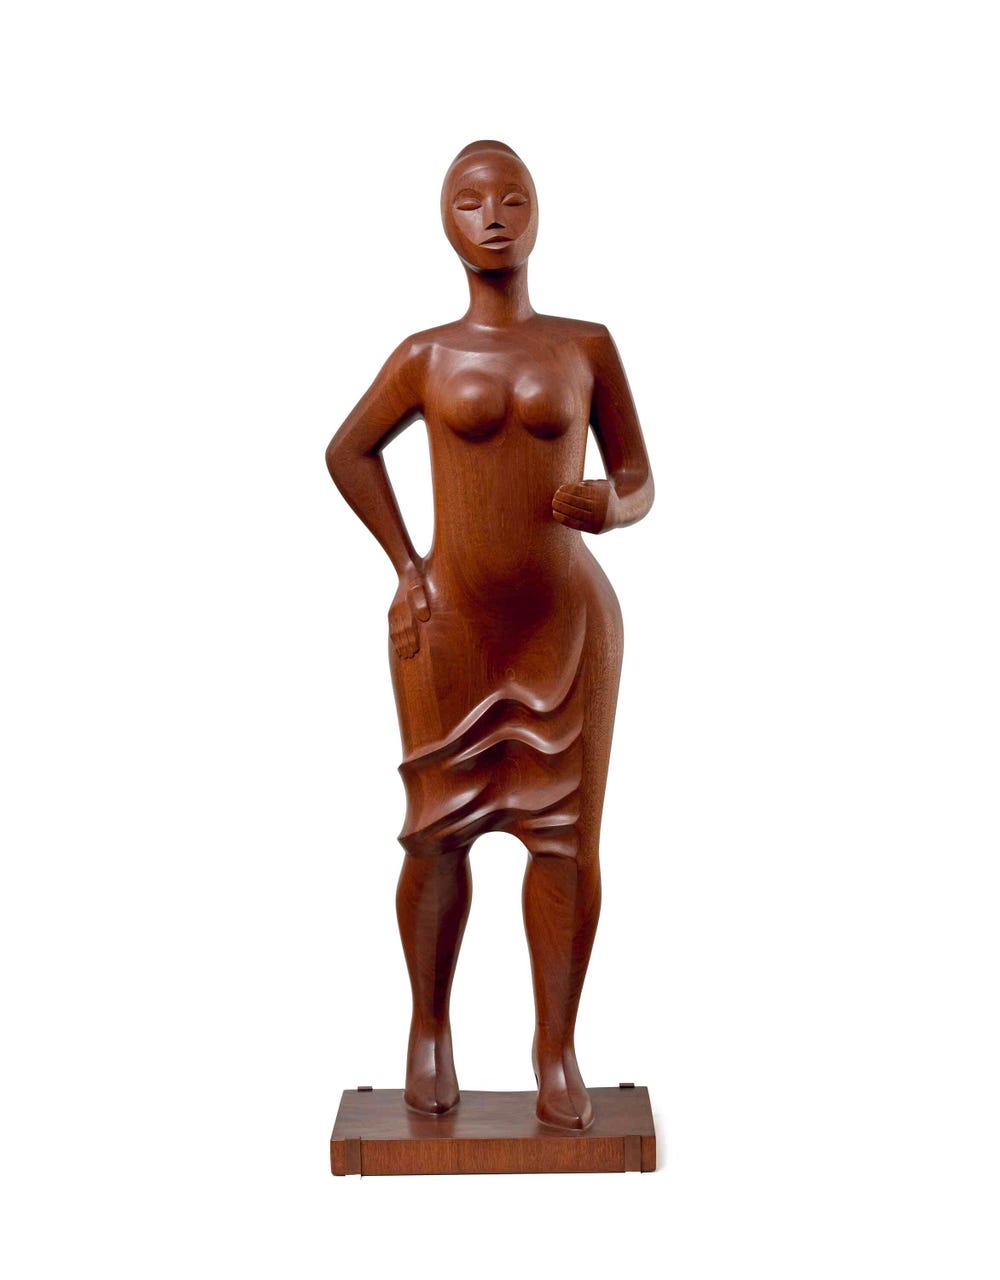 Sculpture of a woman standing in a confident pose